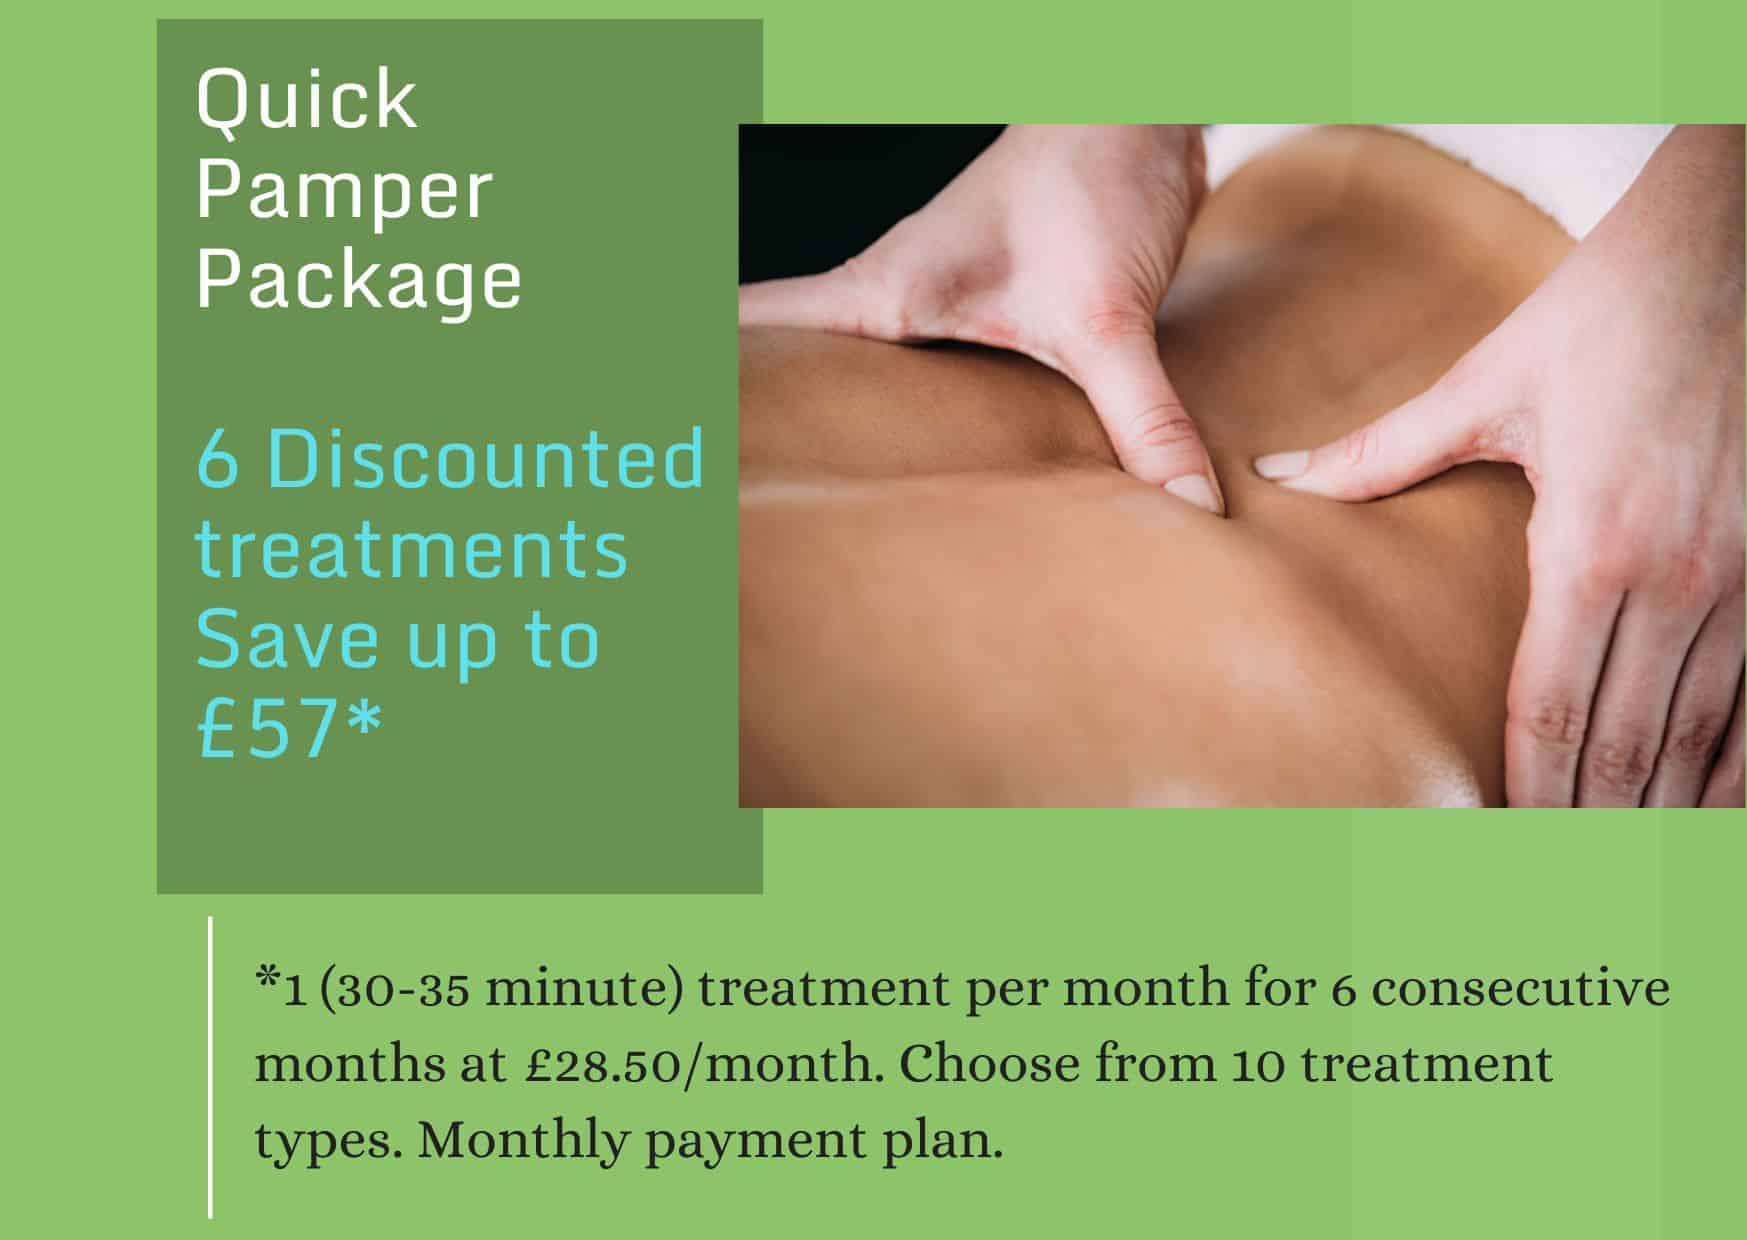 Quick Pamper Package